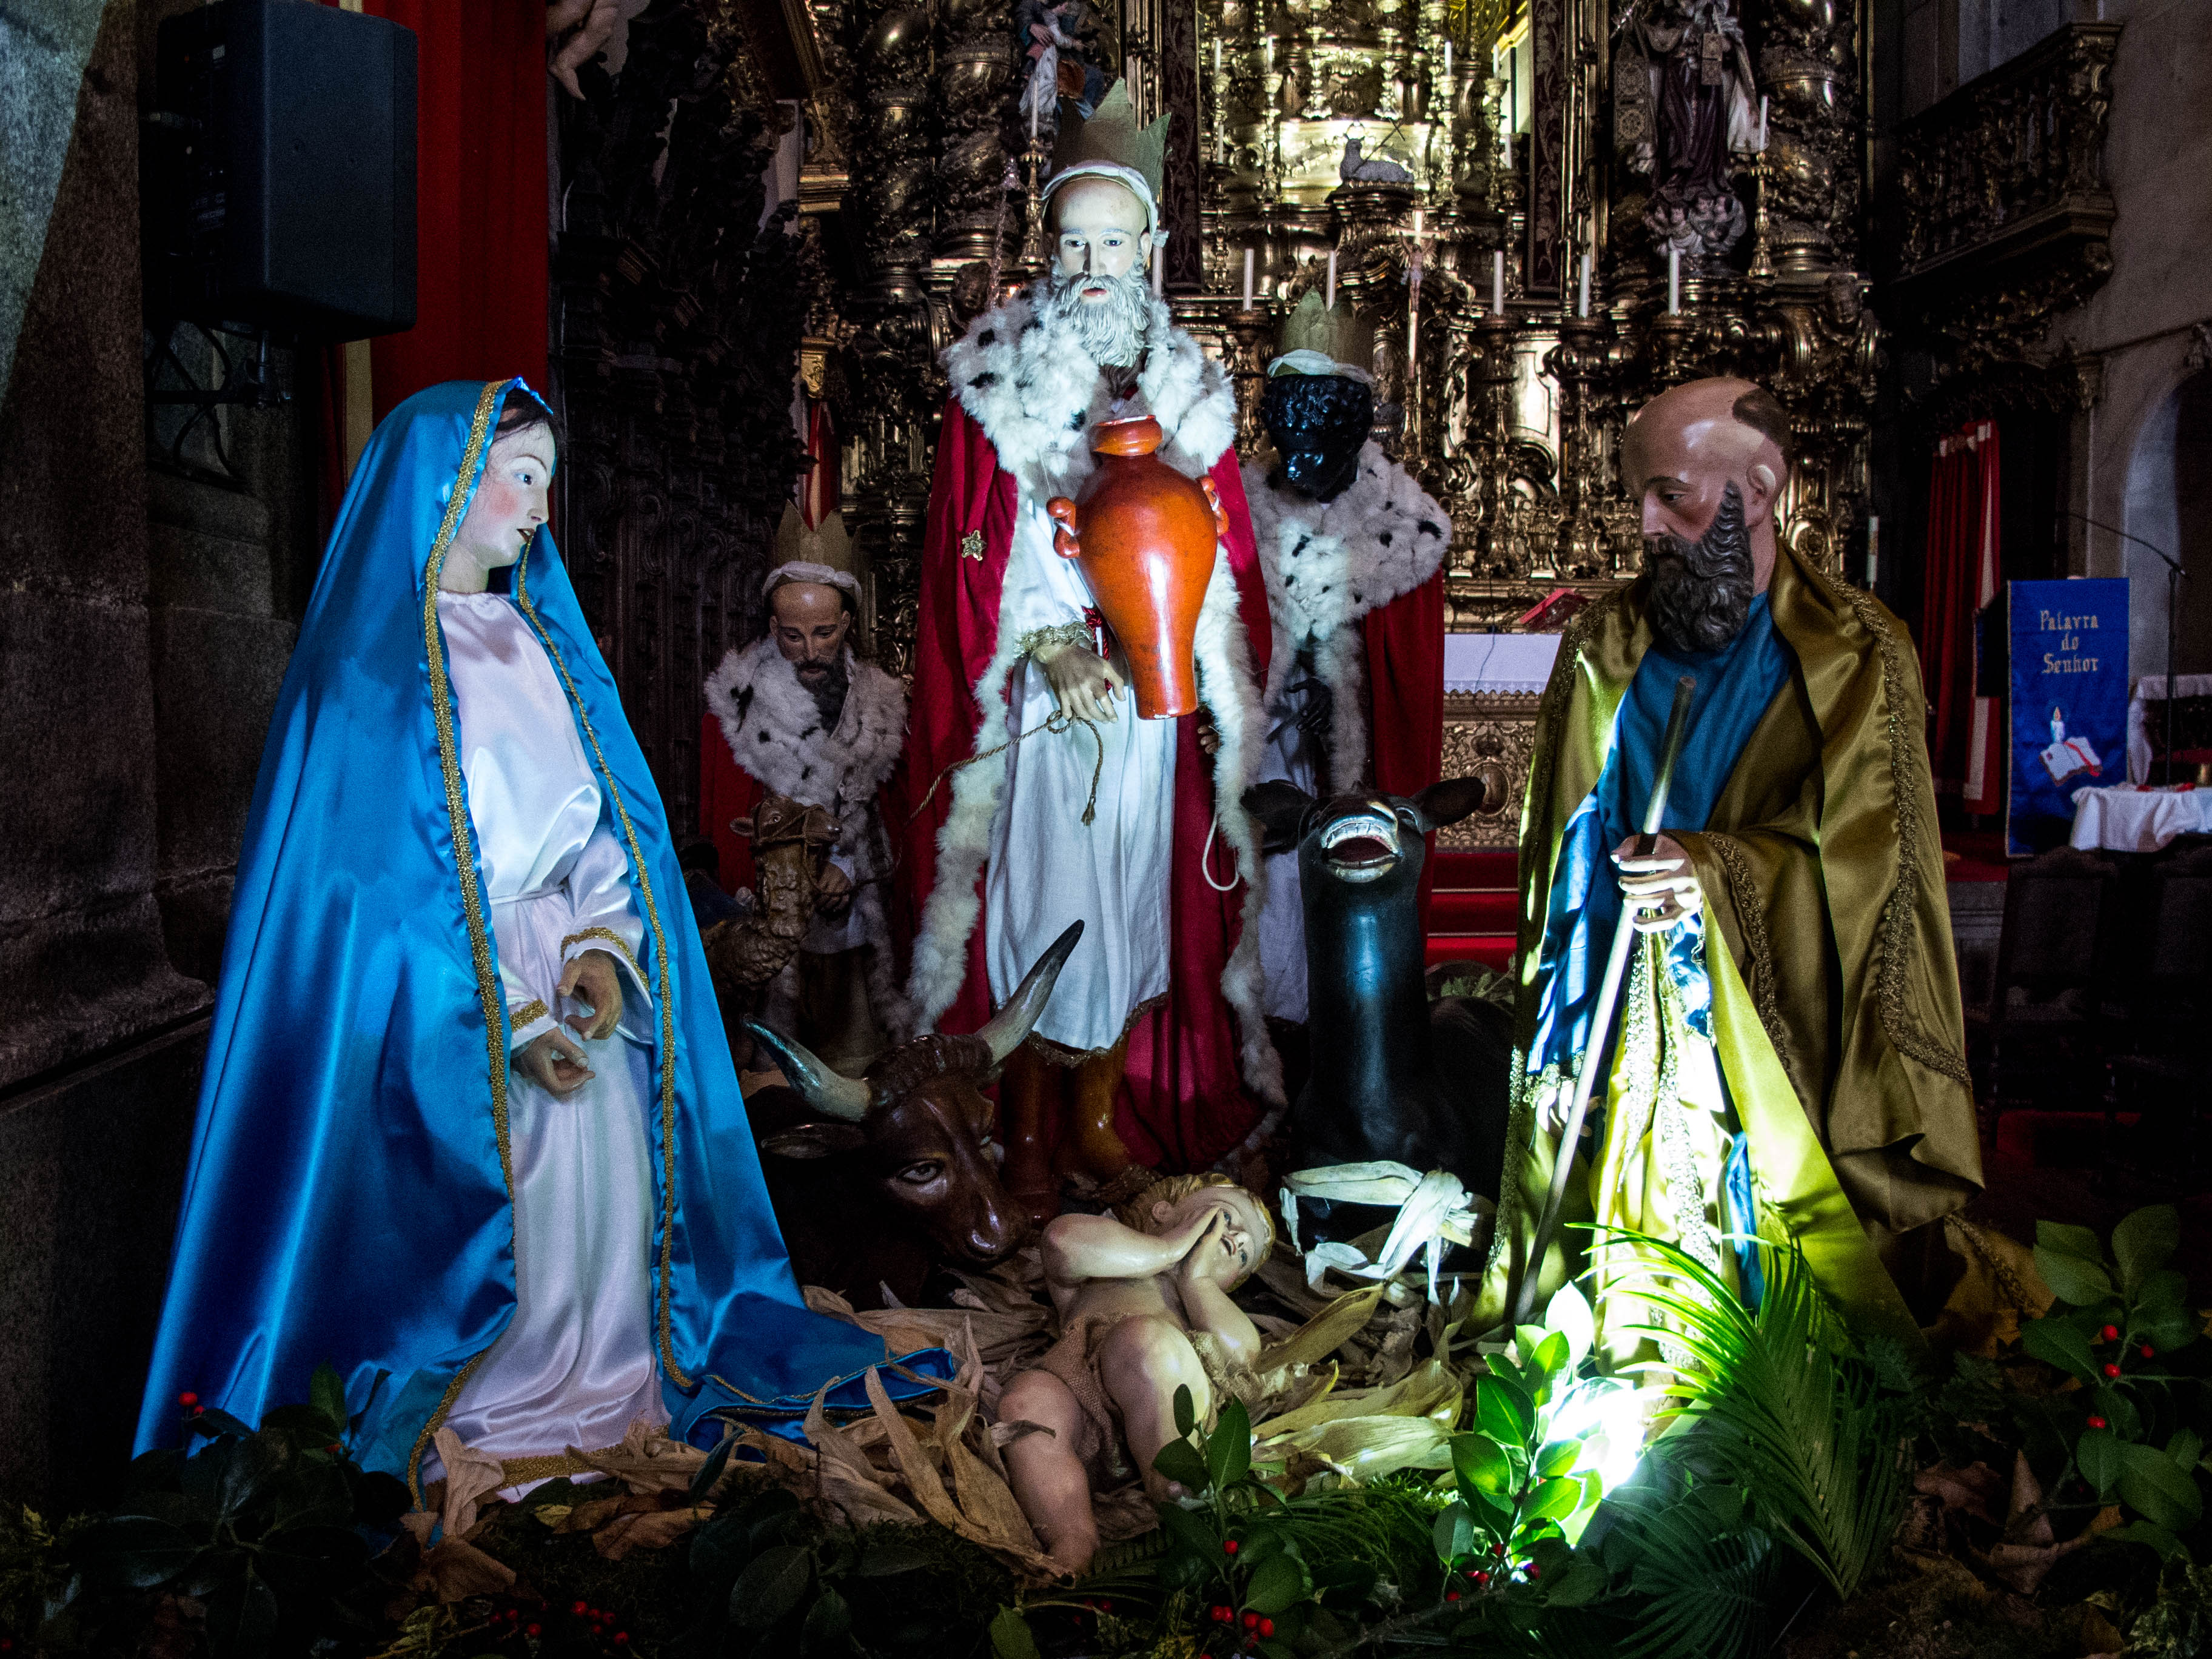 The Three Wise Men are a bit early (this picture was shot on December 17th). Take a look at it in Igreja do Carmo. 